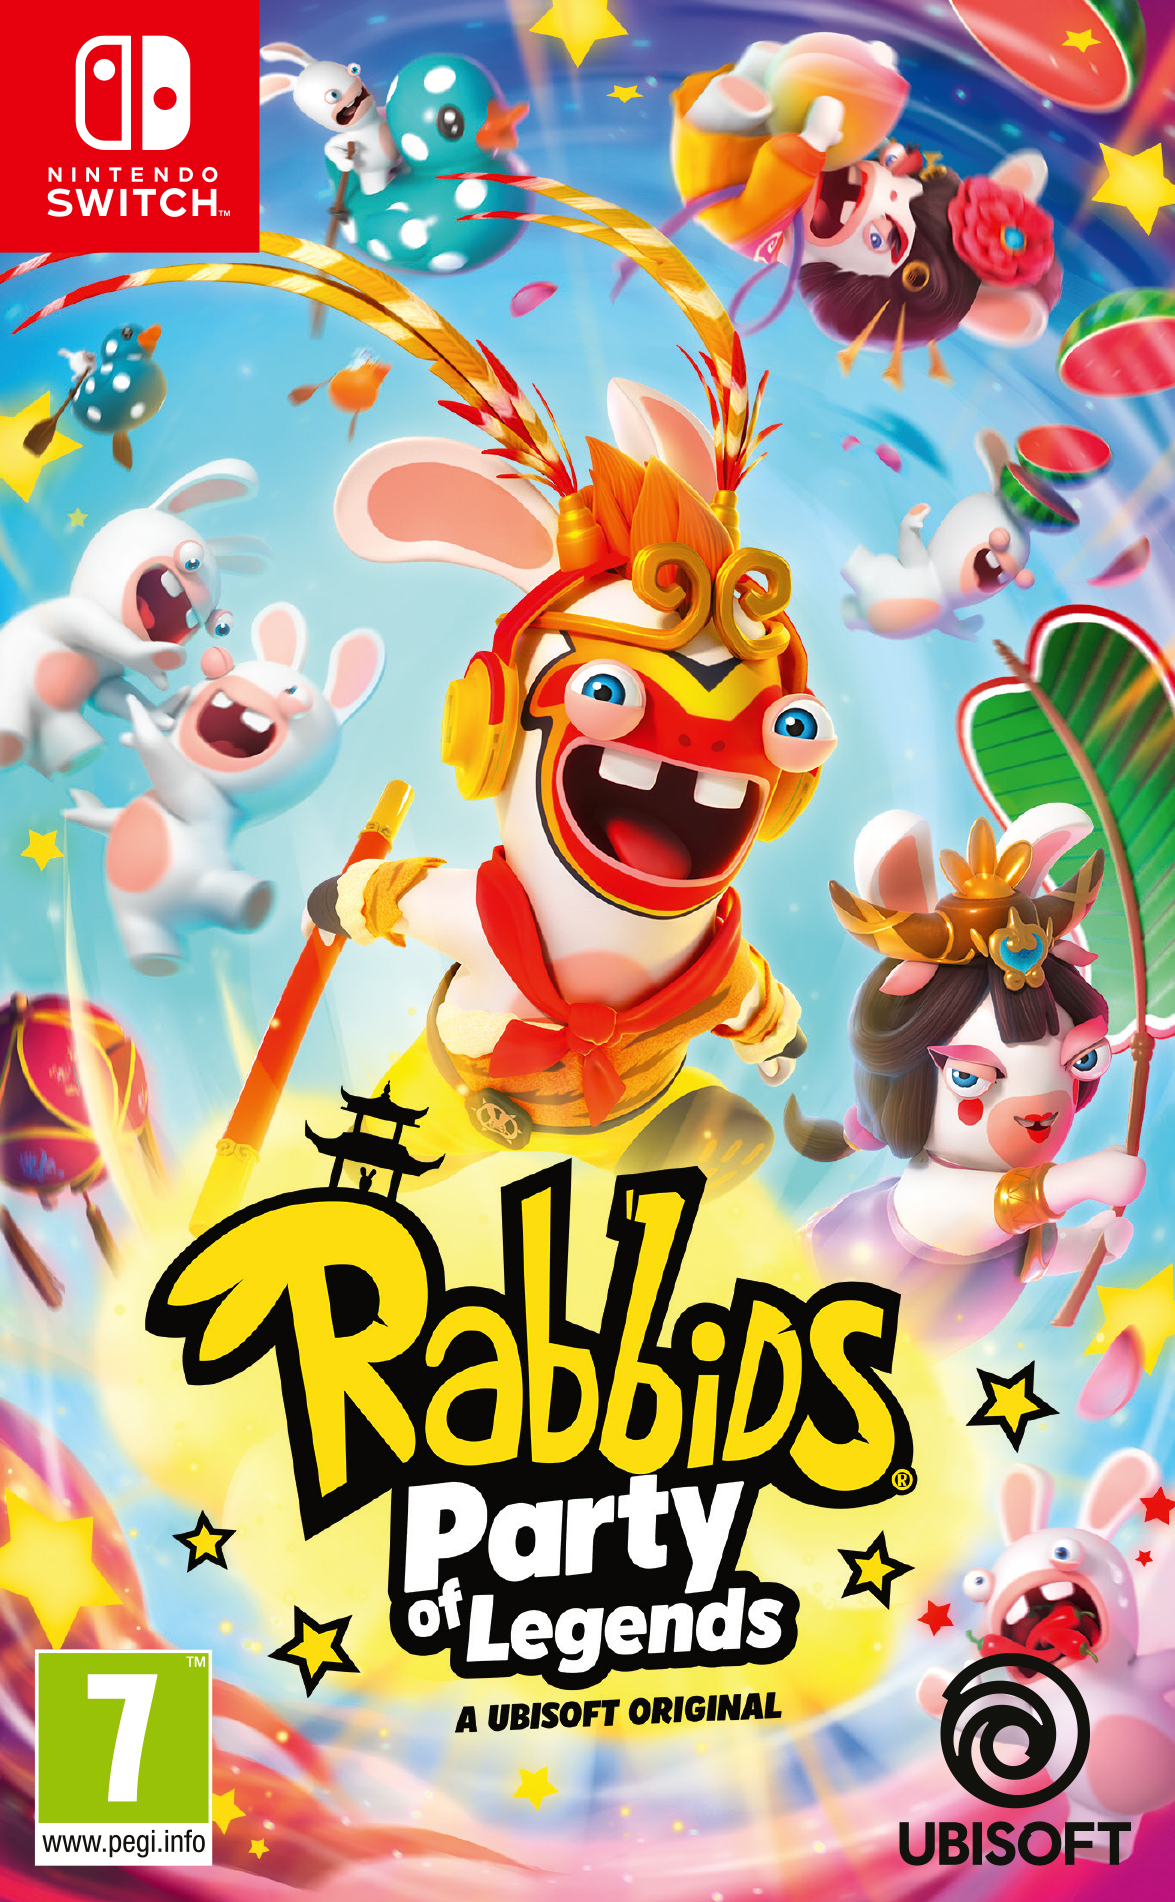 Switch Rabbids Party of Legends